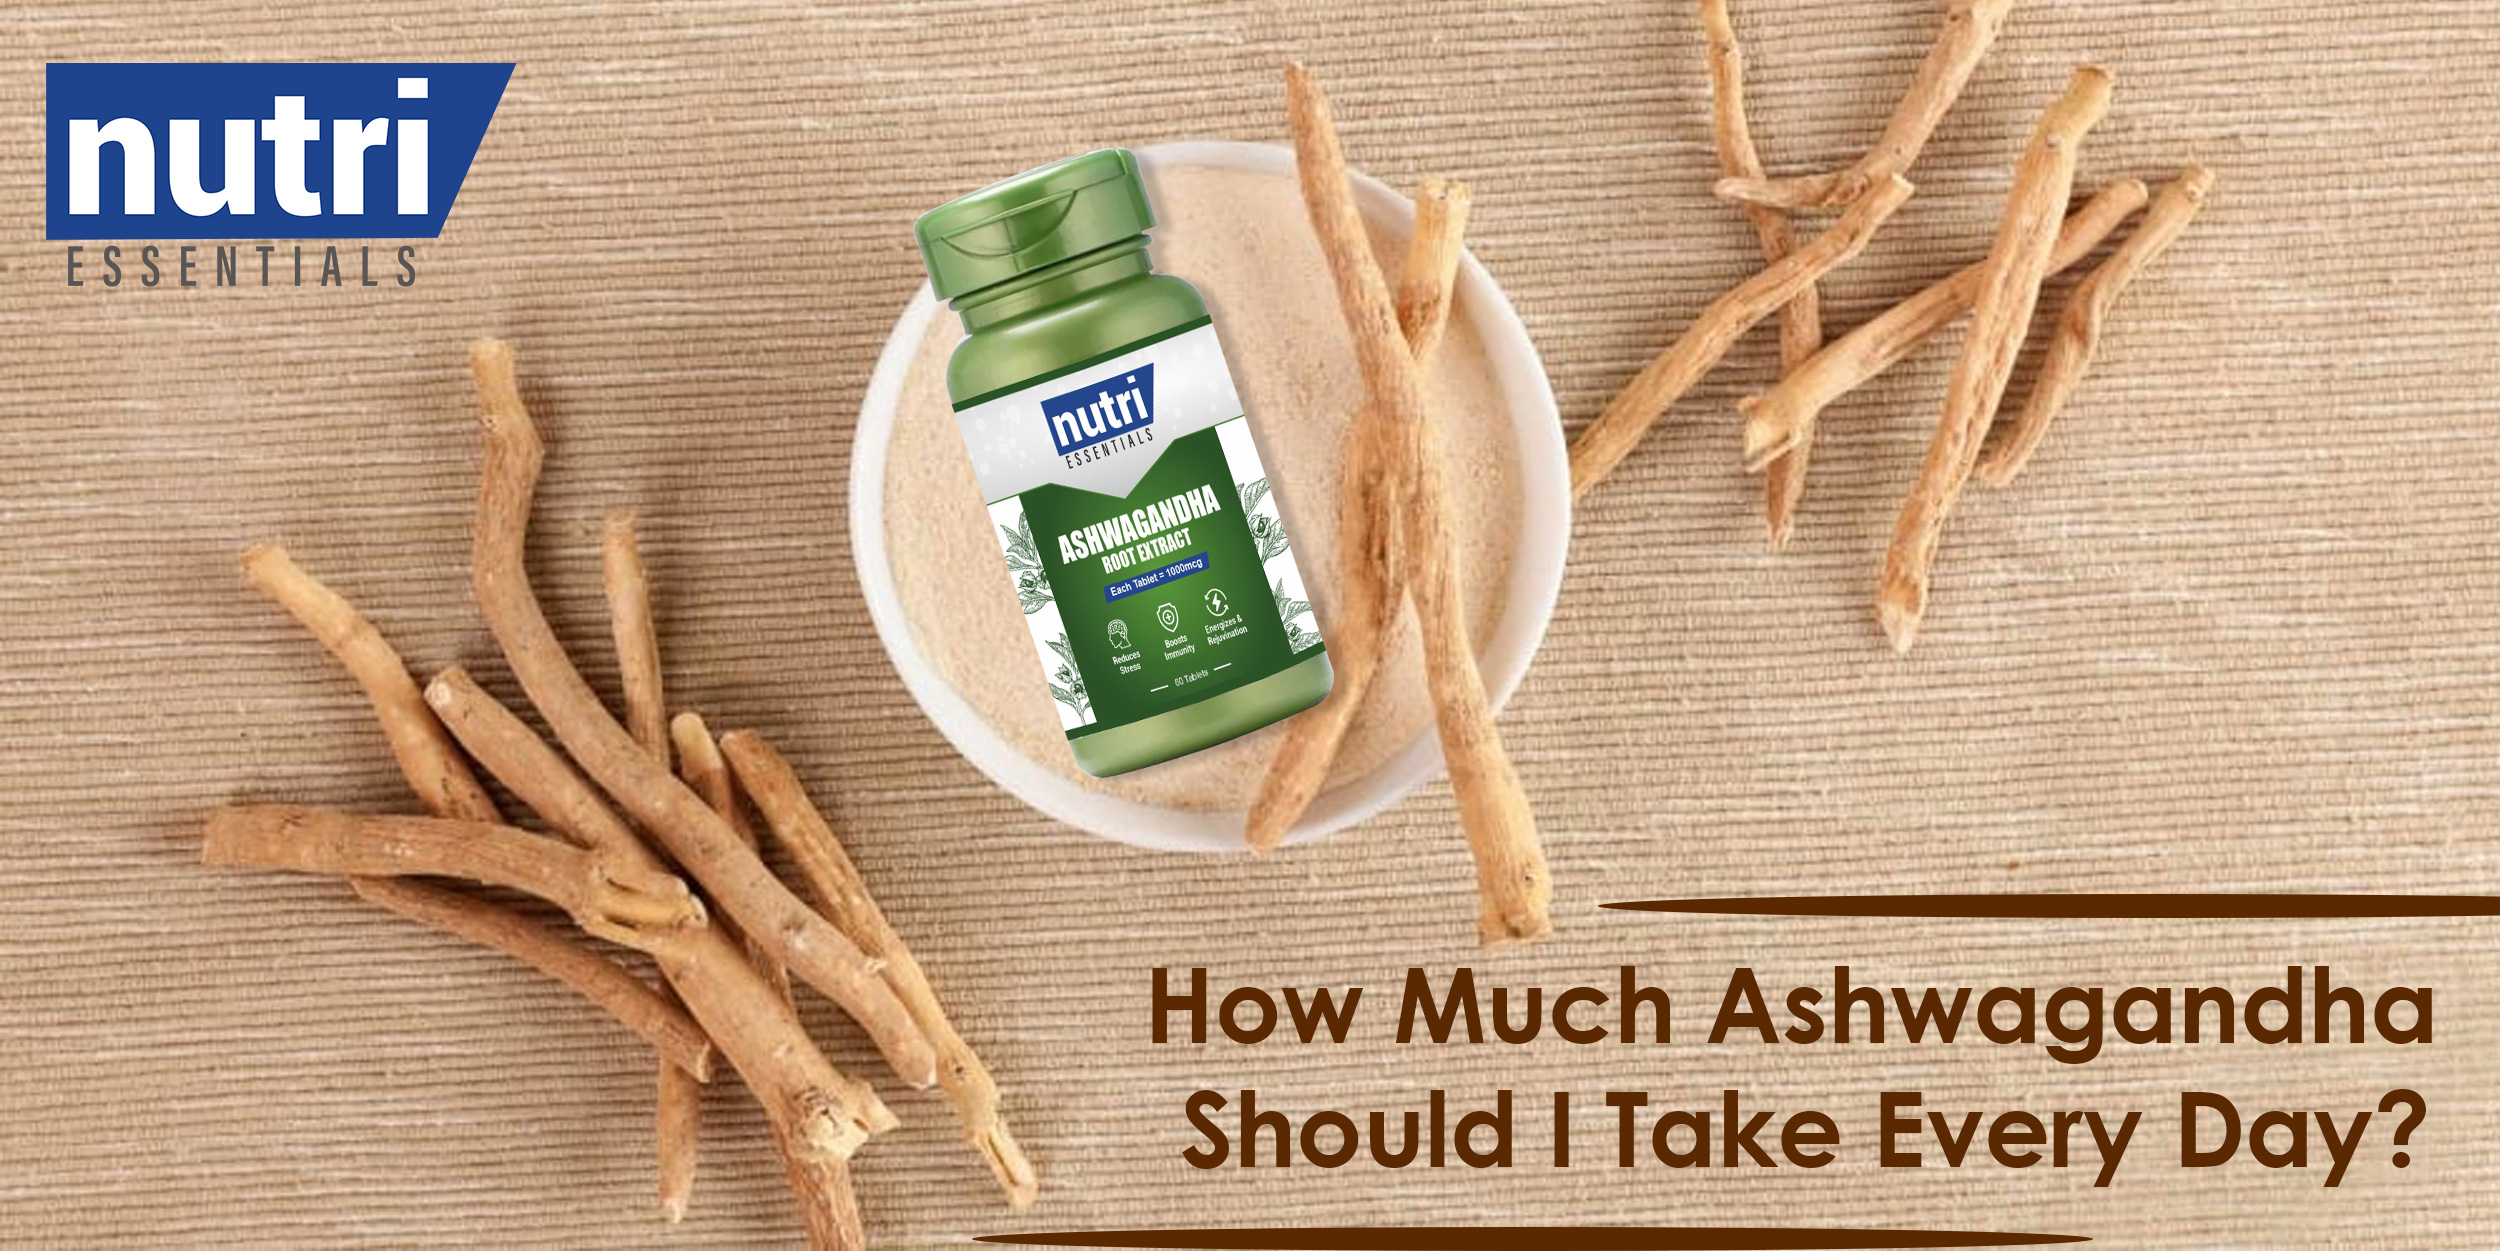 HOW MUCH ASHWAGANDHA SHOULD I TAKE EVERY DAY?